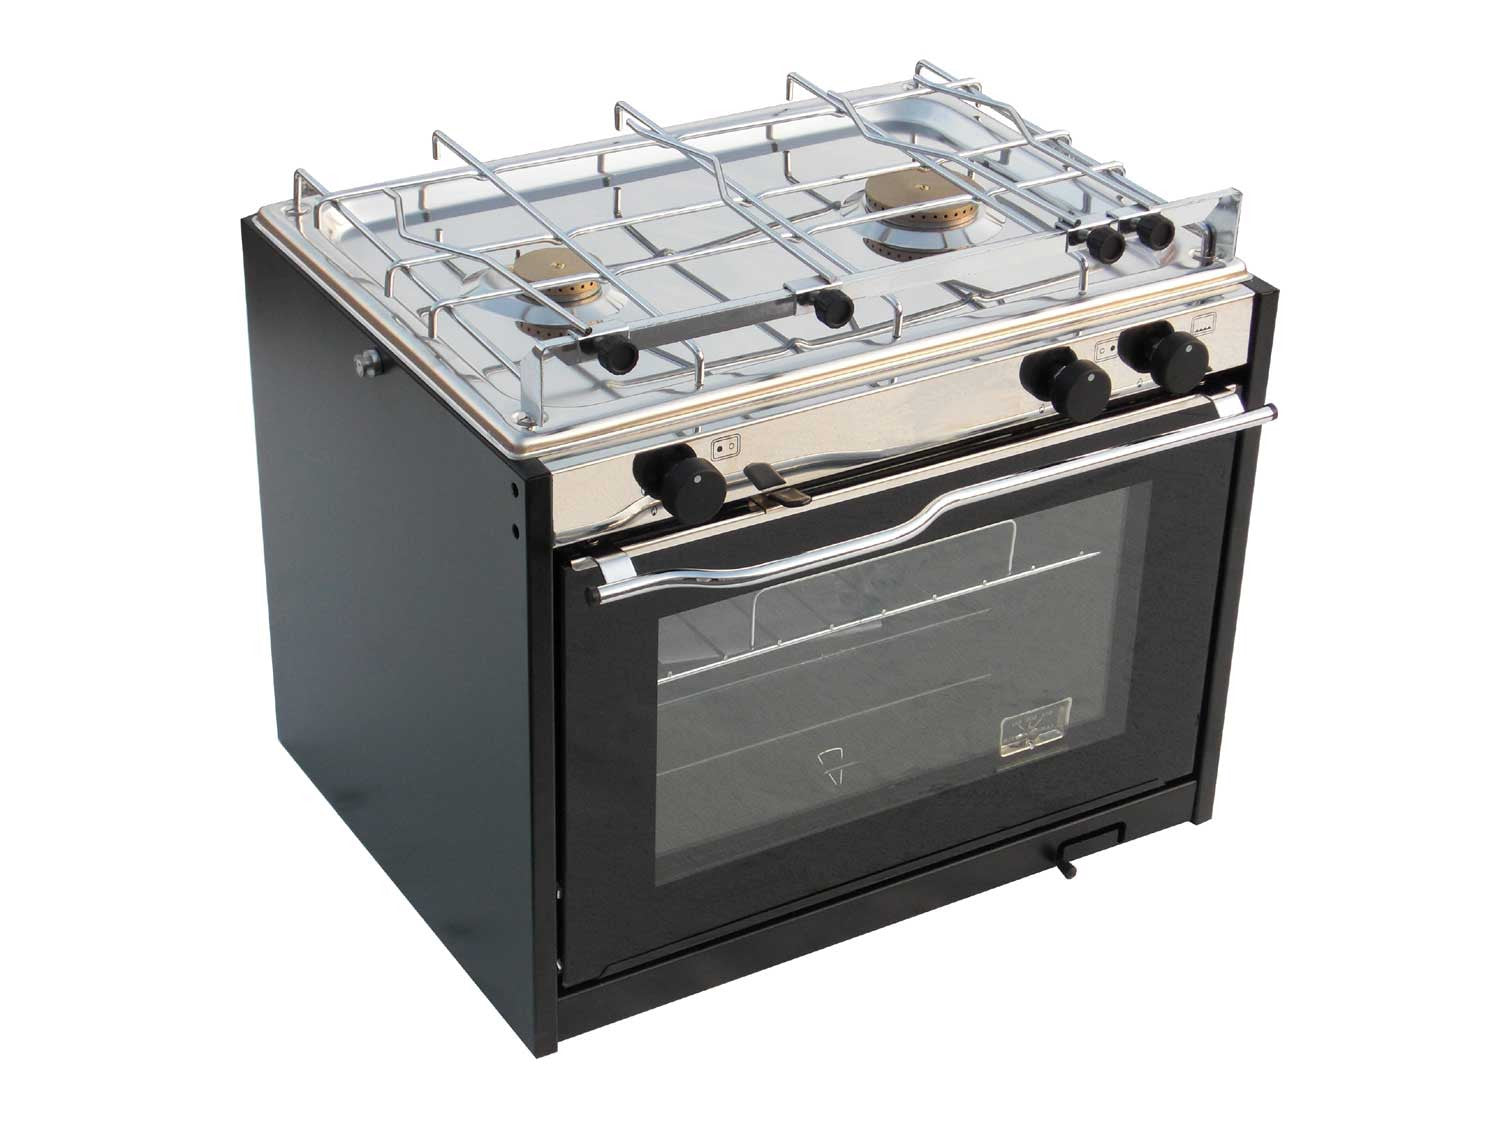 Cooker 2 burners with oven Black